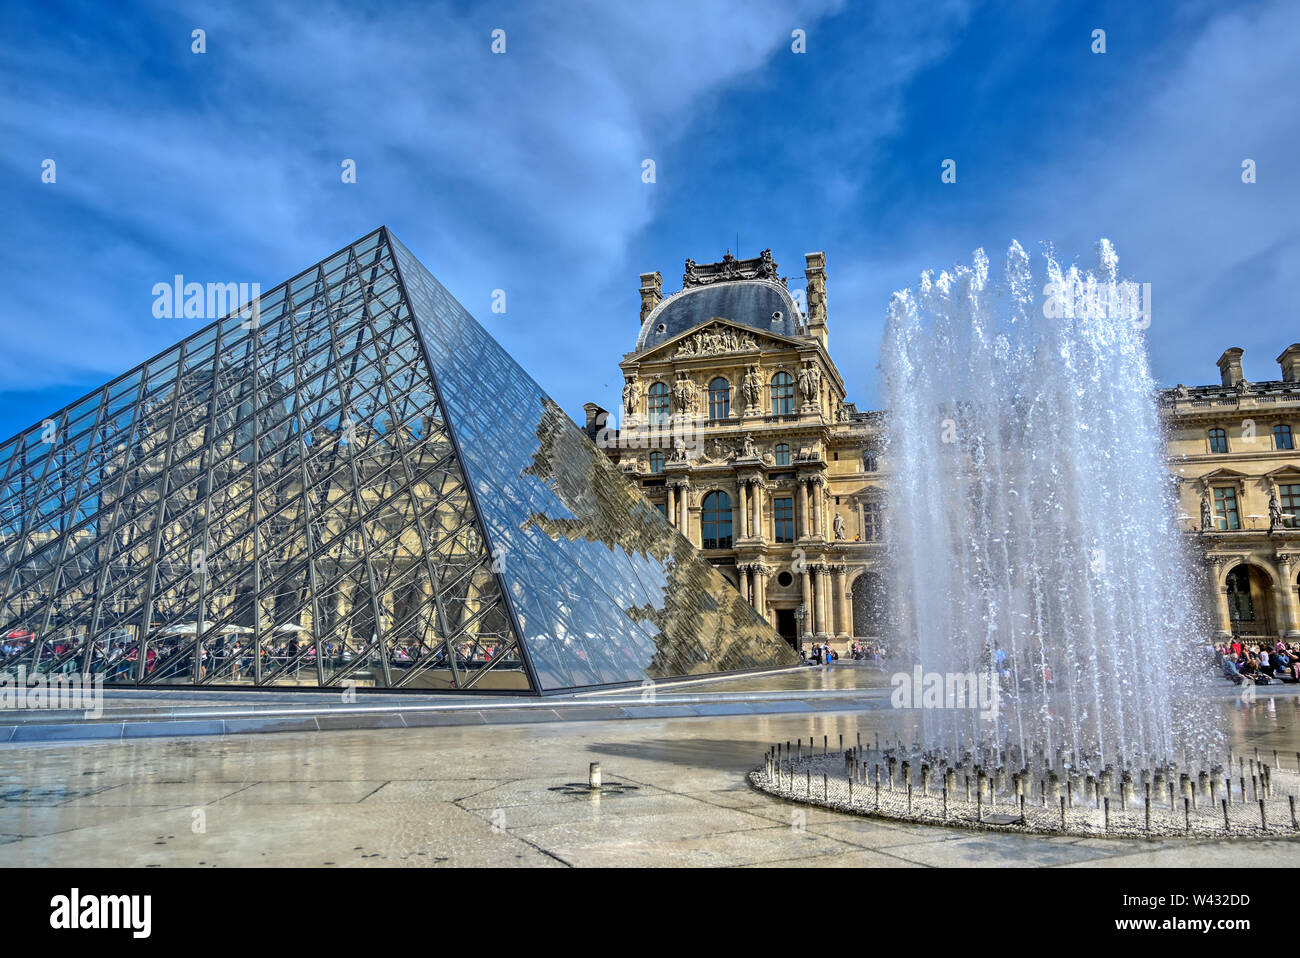 Paris, France - April 21, 2019 - A view of the Louvre Museum, the world's largest art museum and a historic monument in Paris, France, on a sunny day. Stock Photo